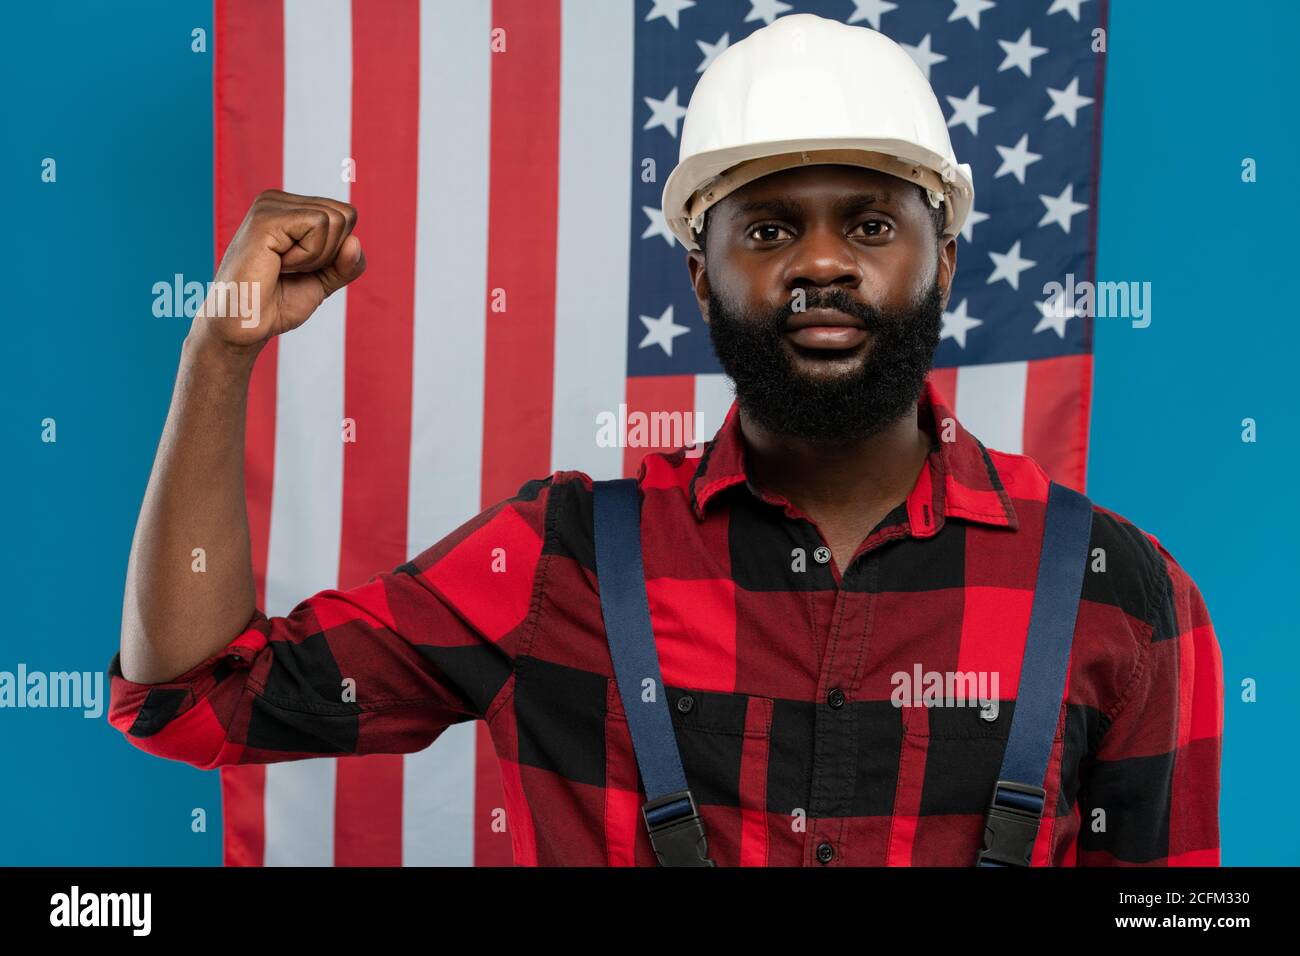 Young builder or foreman showing his strong arm bent in elbow against US flag Stock Photo